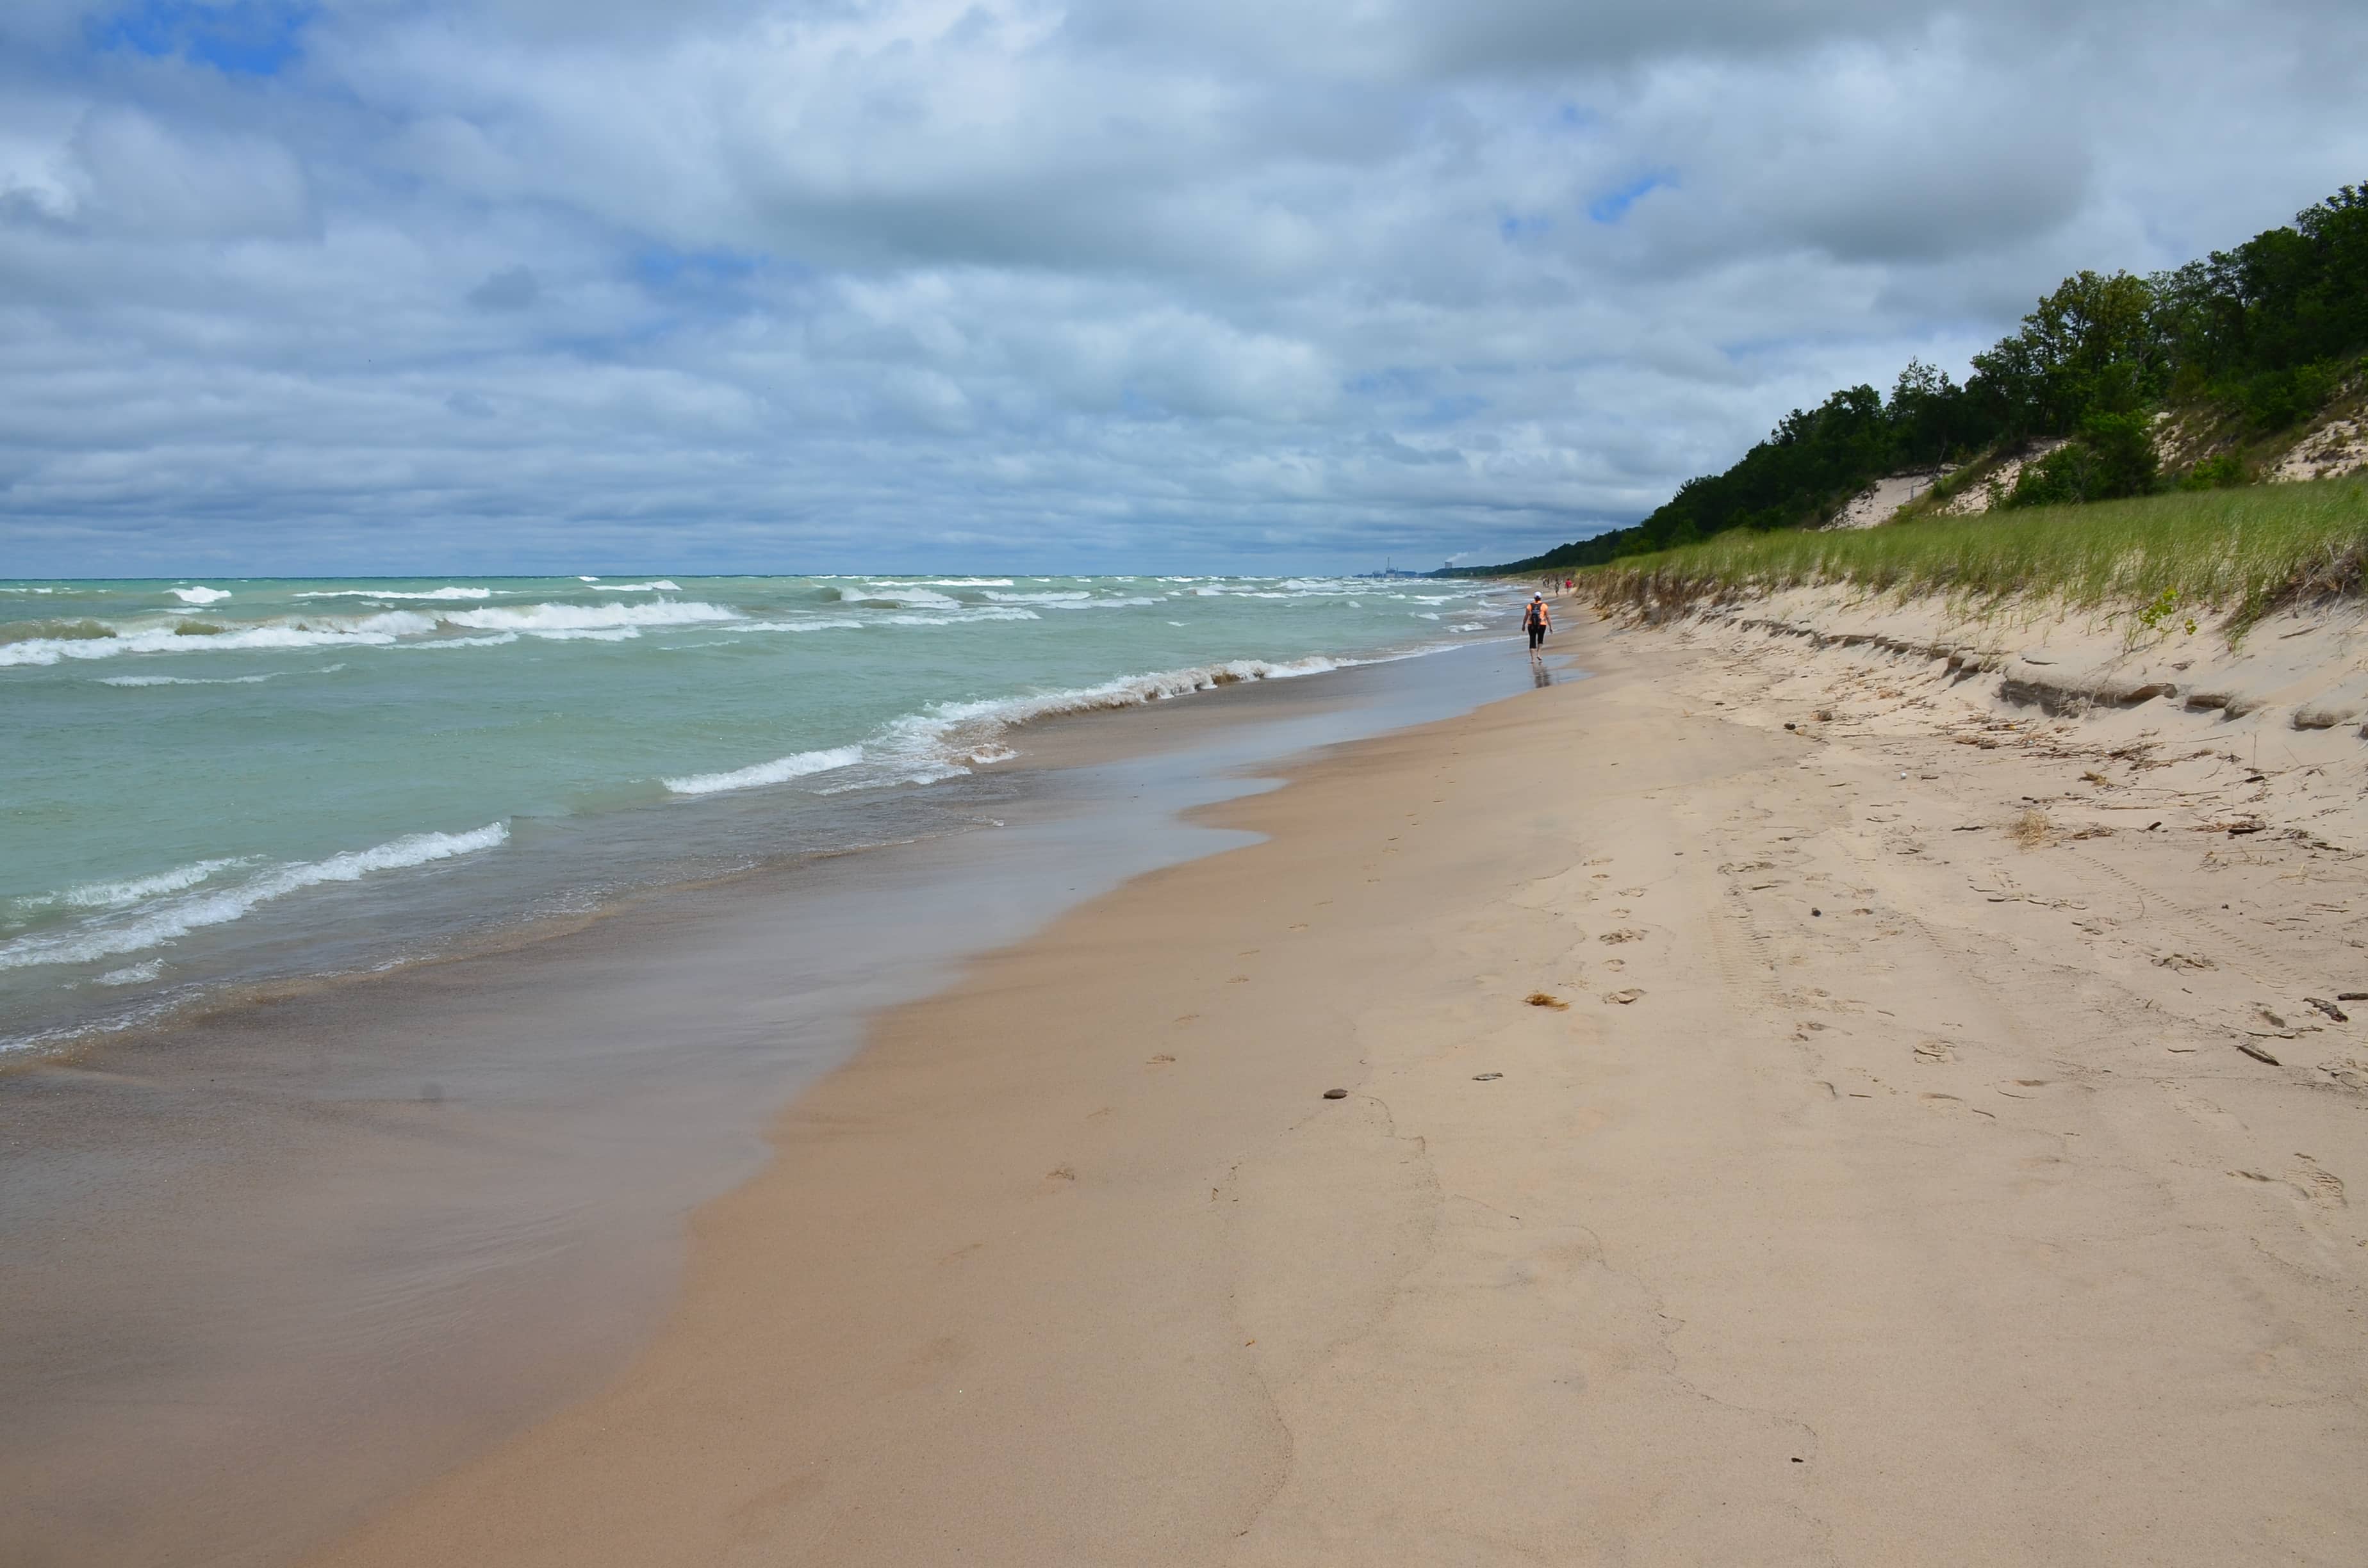 Looking east on the beach at Indiana Dunes State Park